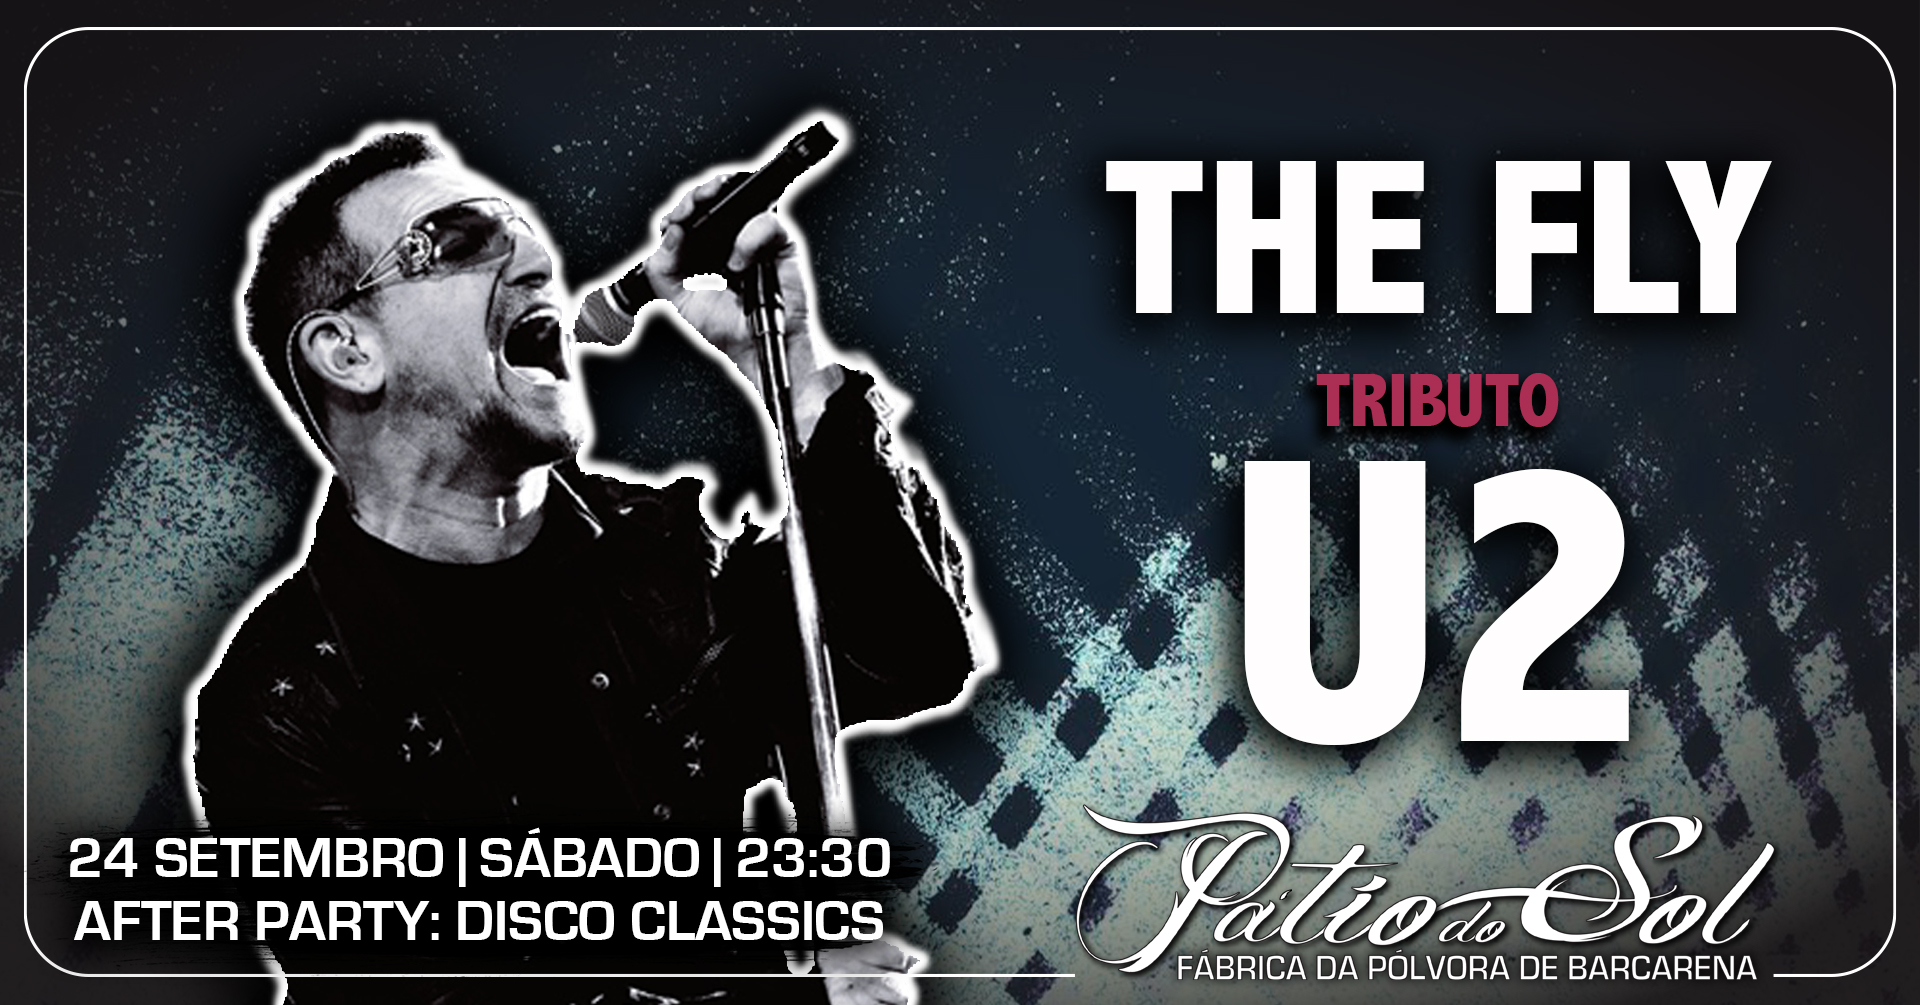 The Fly - Tributo U2 | After Party: Rock/Disco Classics